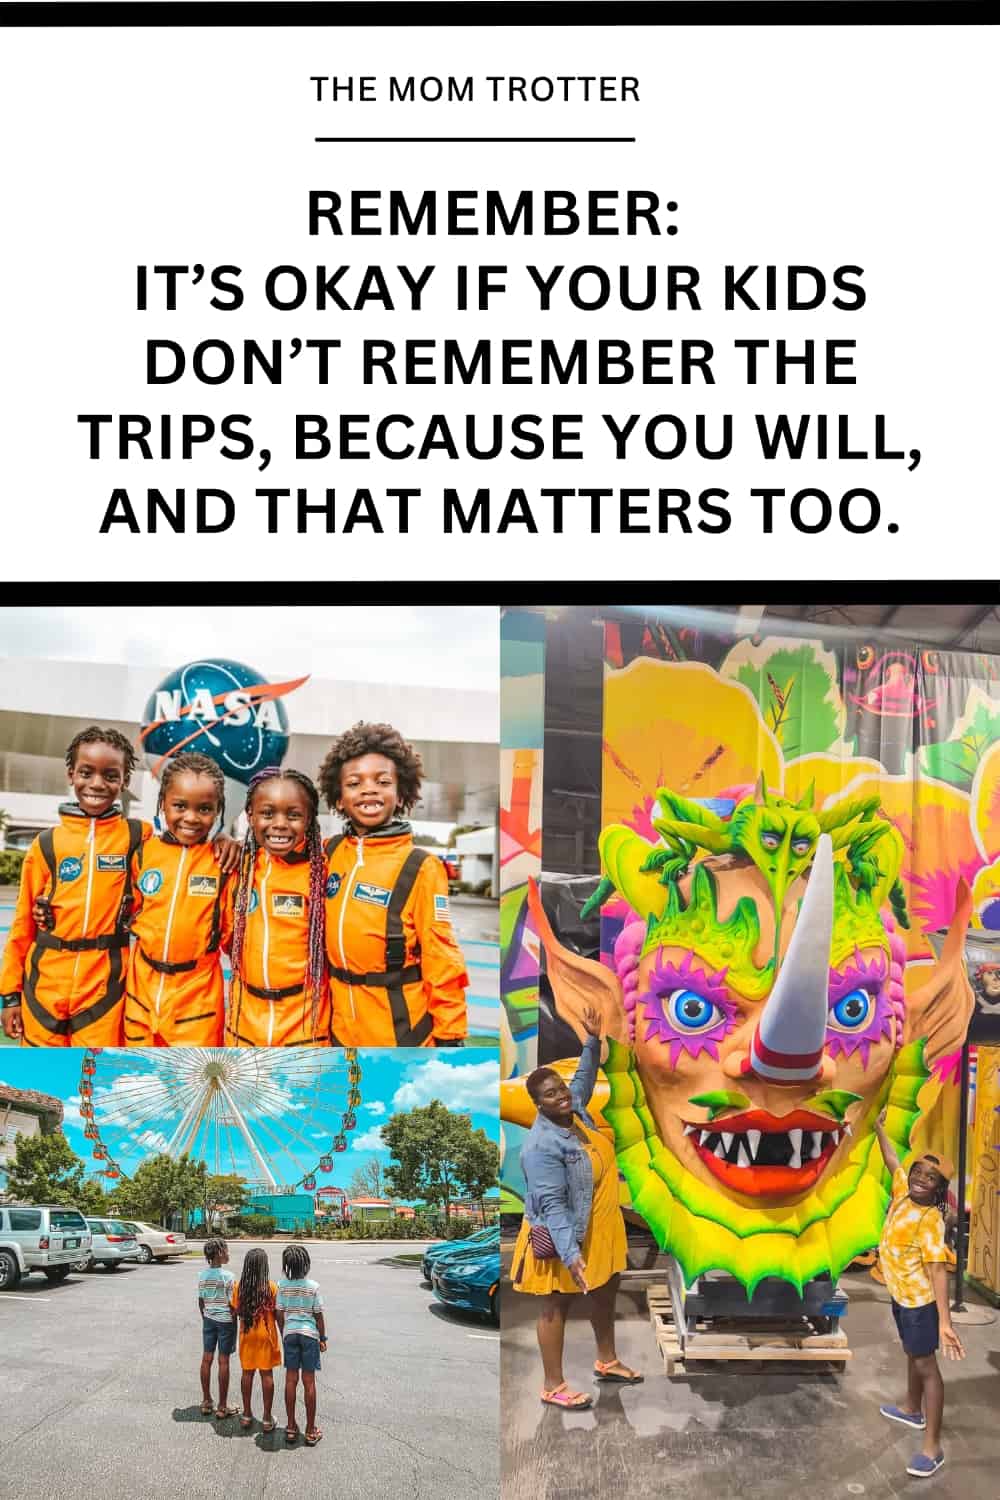 It’s okay if your kids don’t remember the trips, because you will, and that matters too.